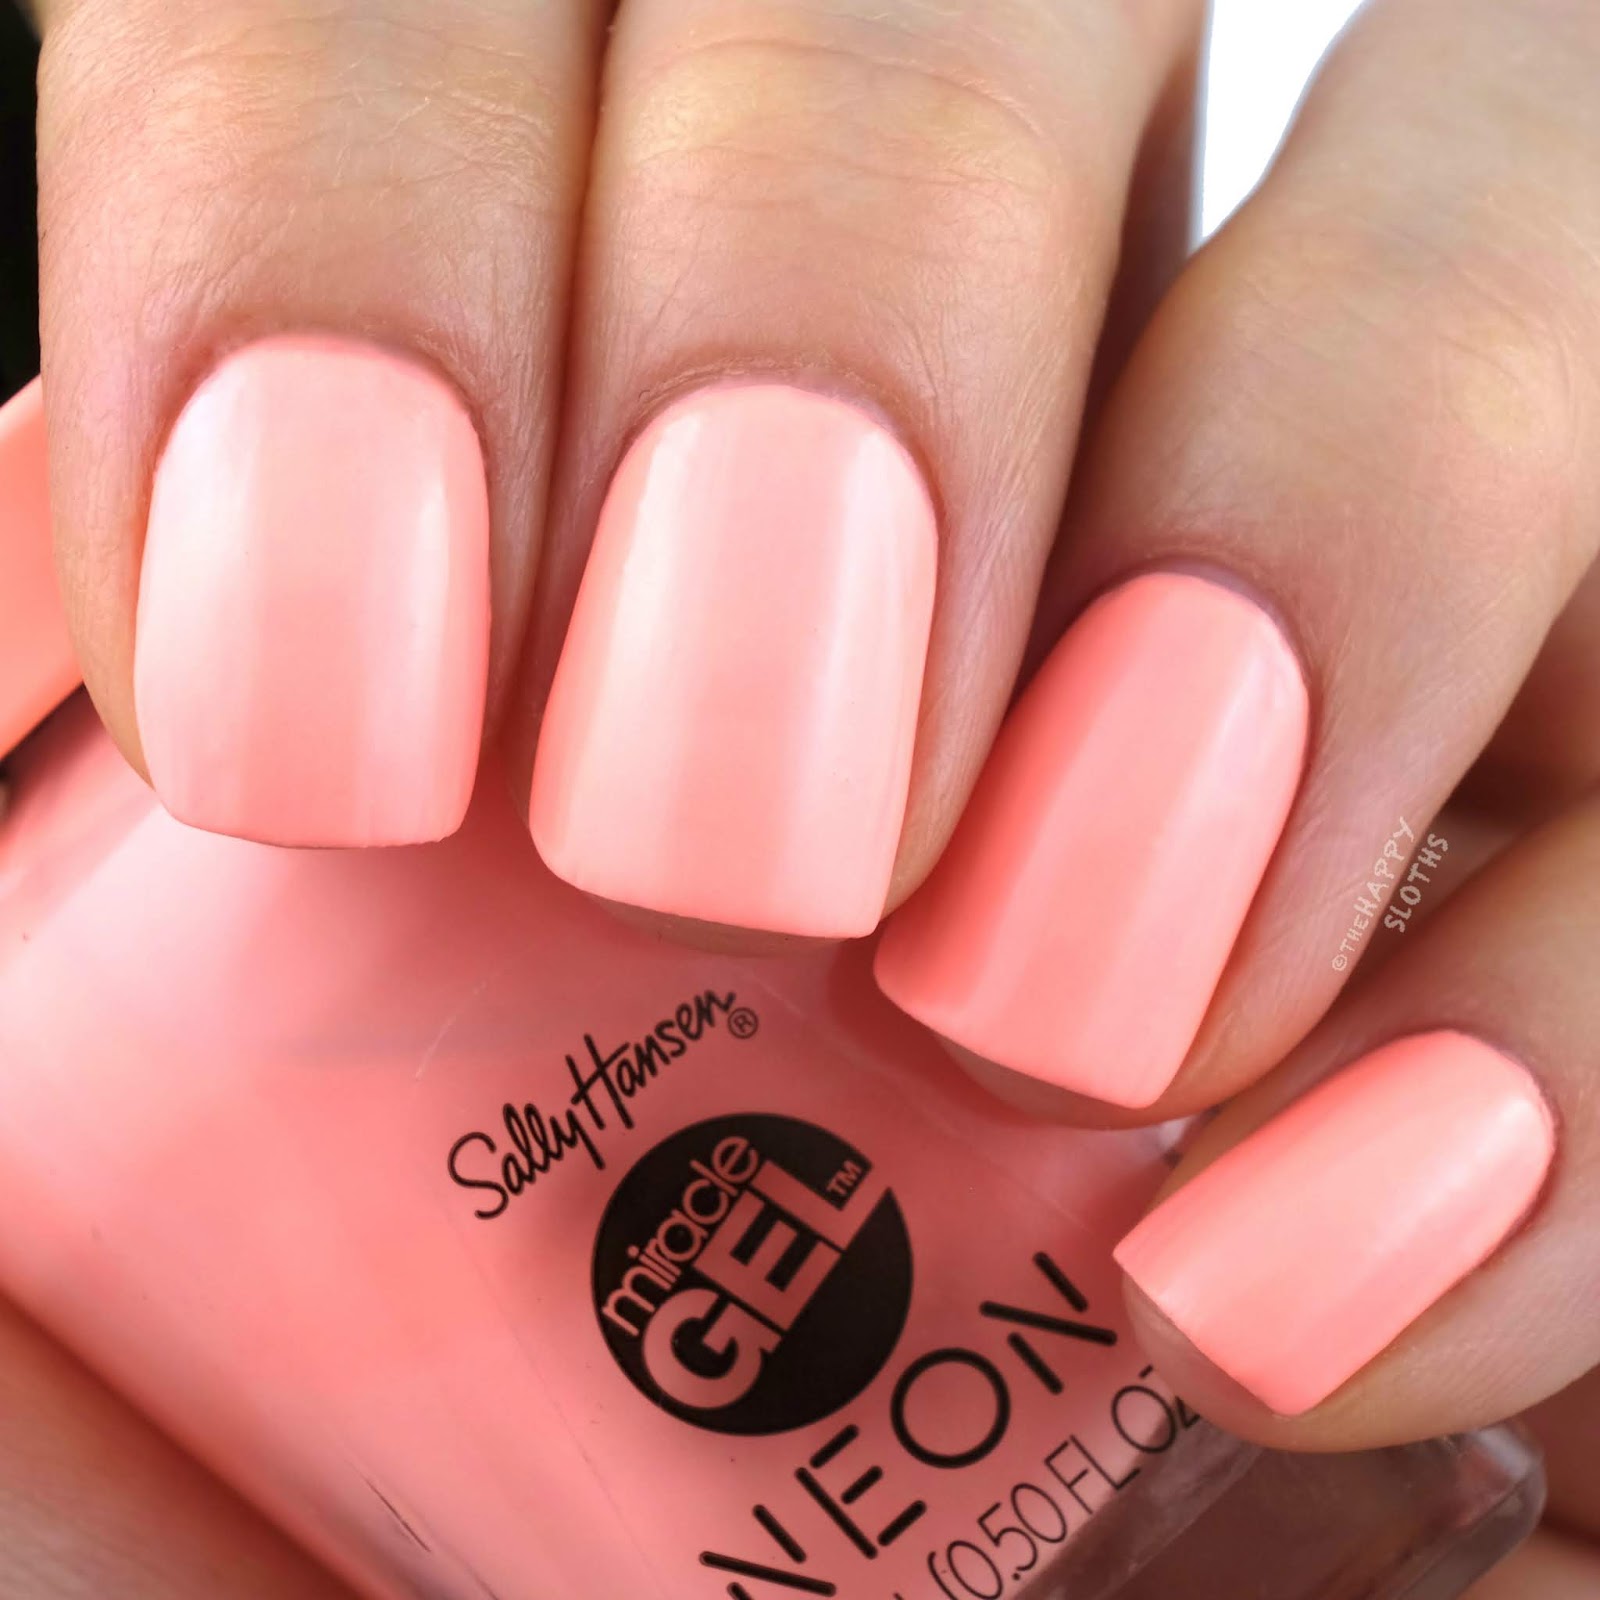 Sally Hansen | Miracle Gel Summer 2019 Neon Collection | Peach Please: Review and Swatches